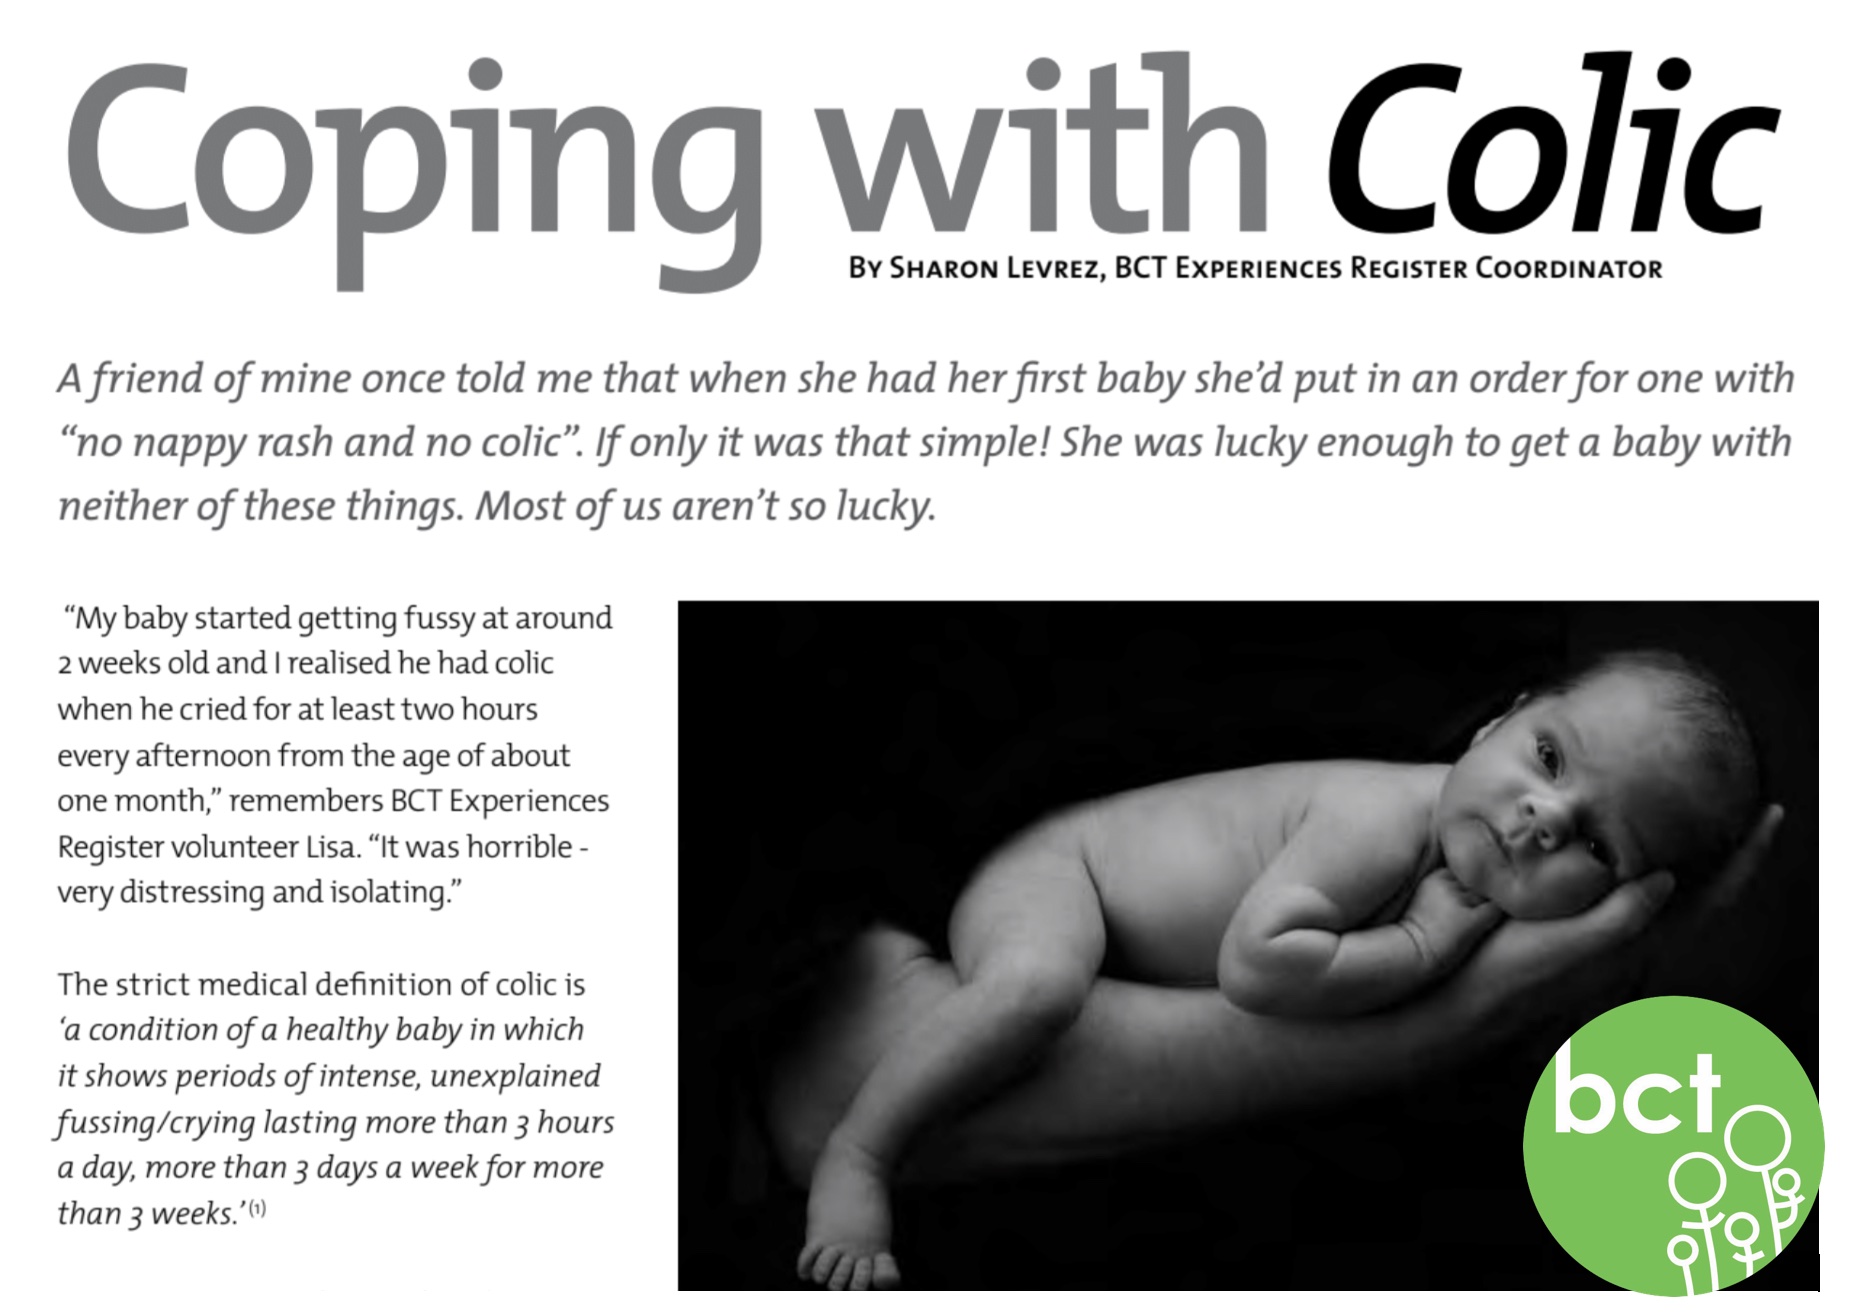 Coping with colic